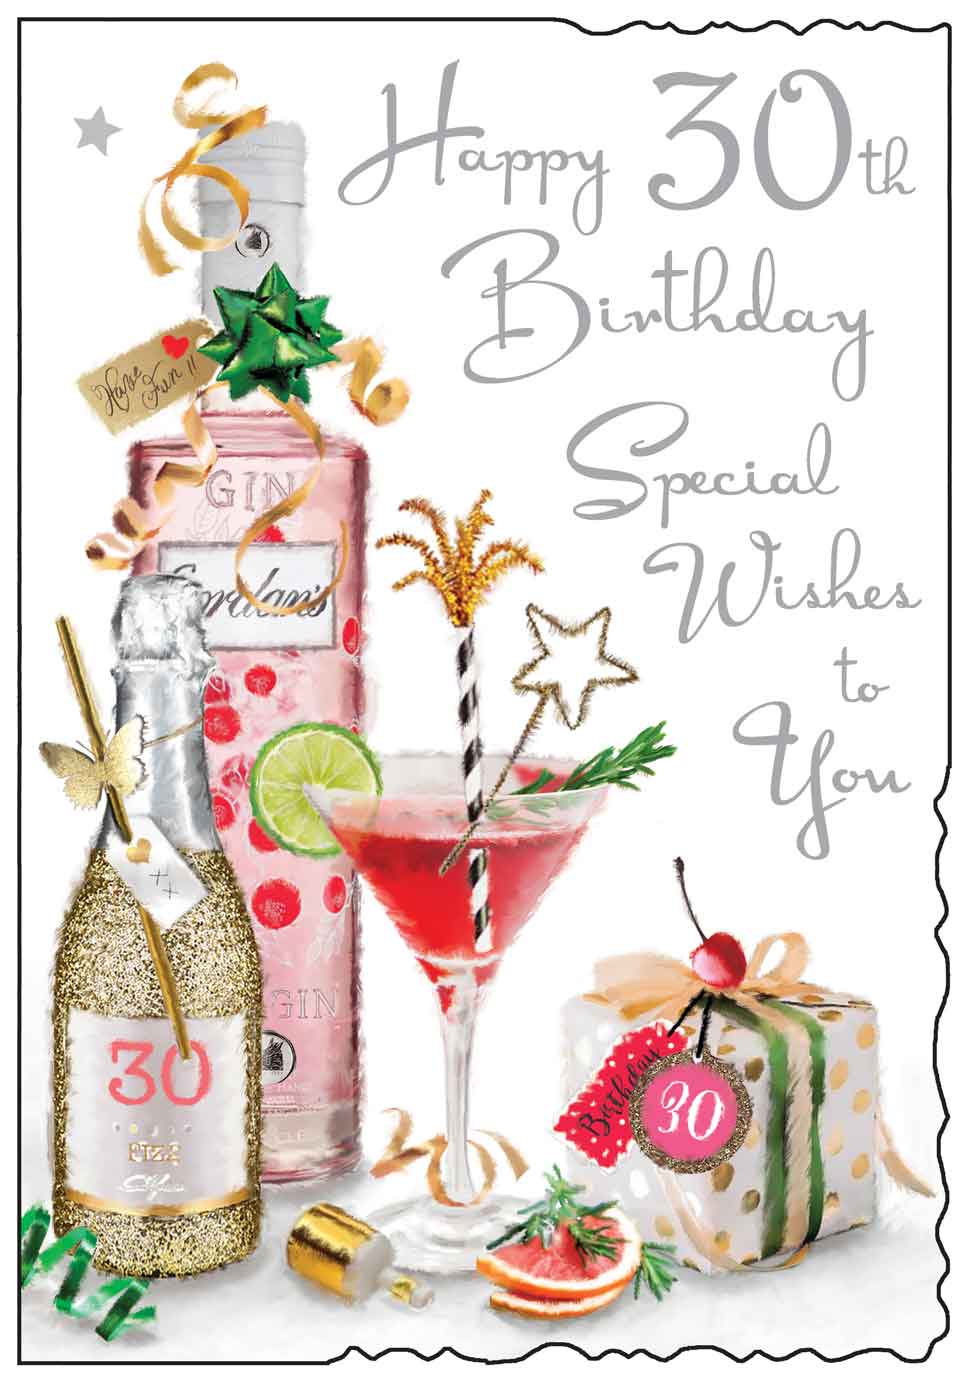 30th Birthday Card - A Choice Of Cocktails To Celebrate